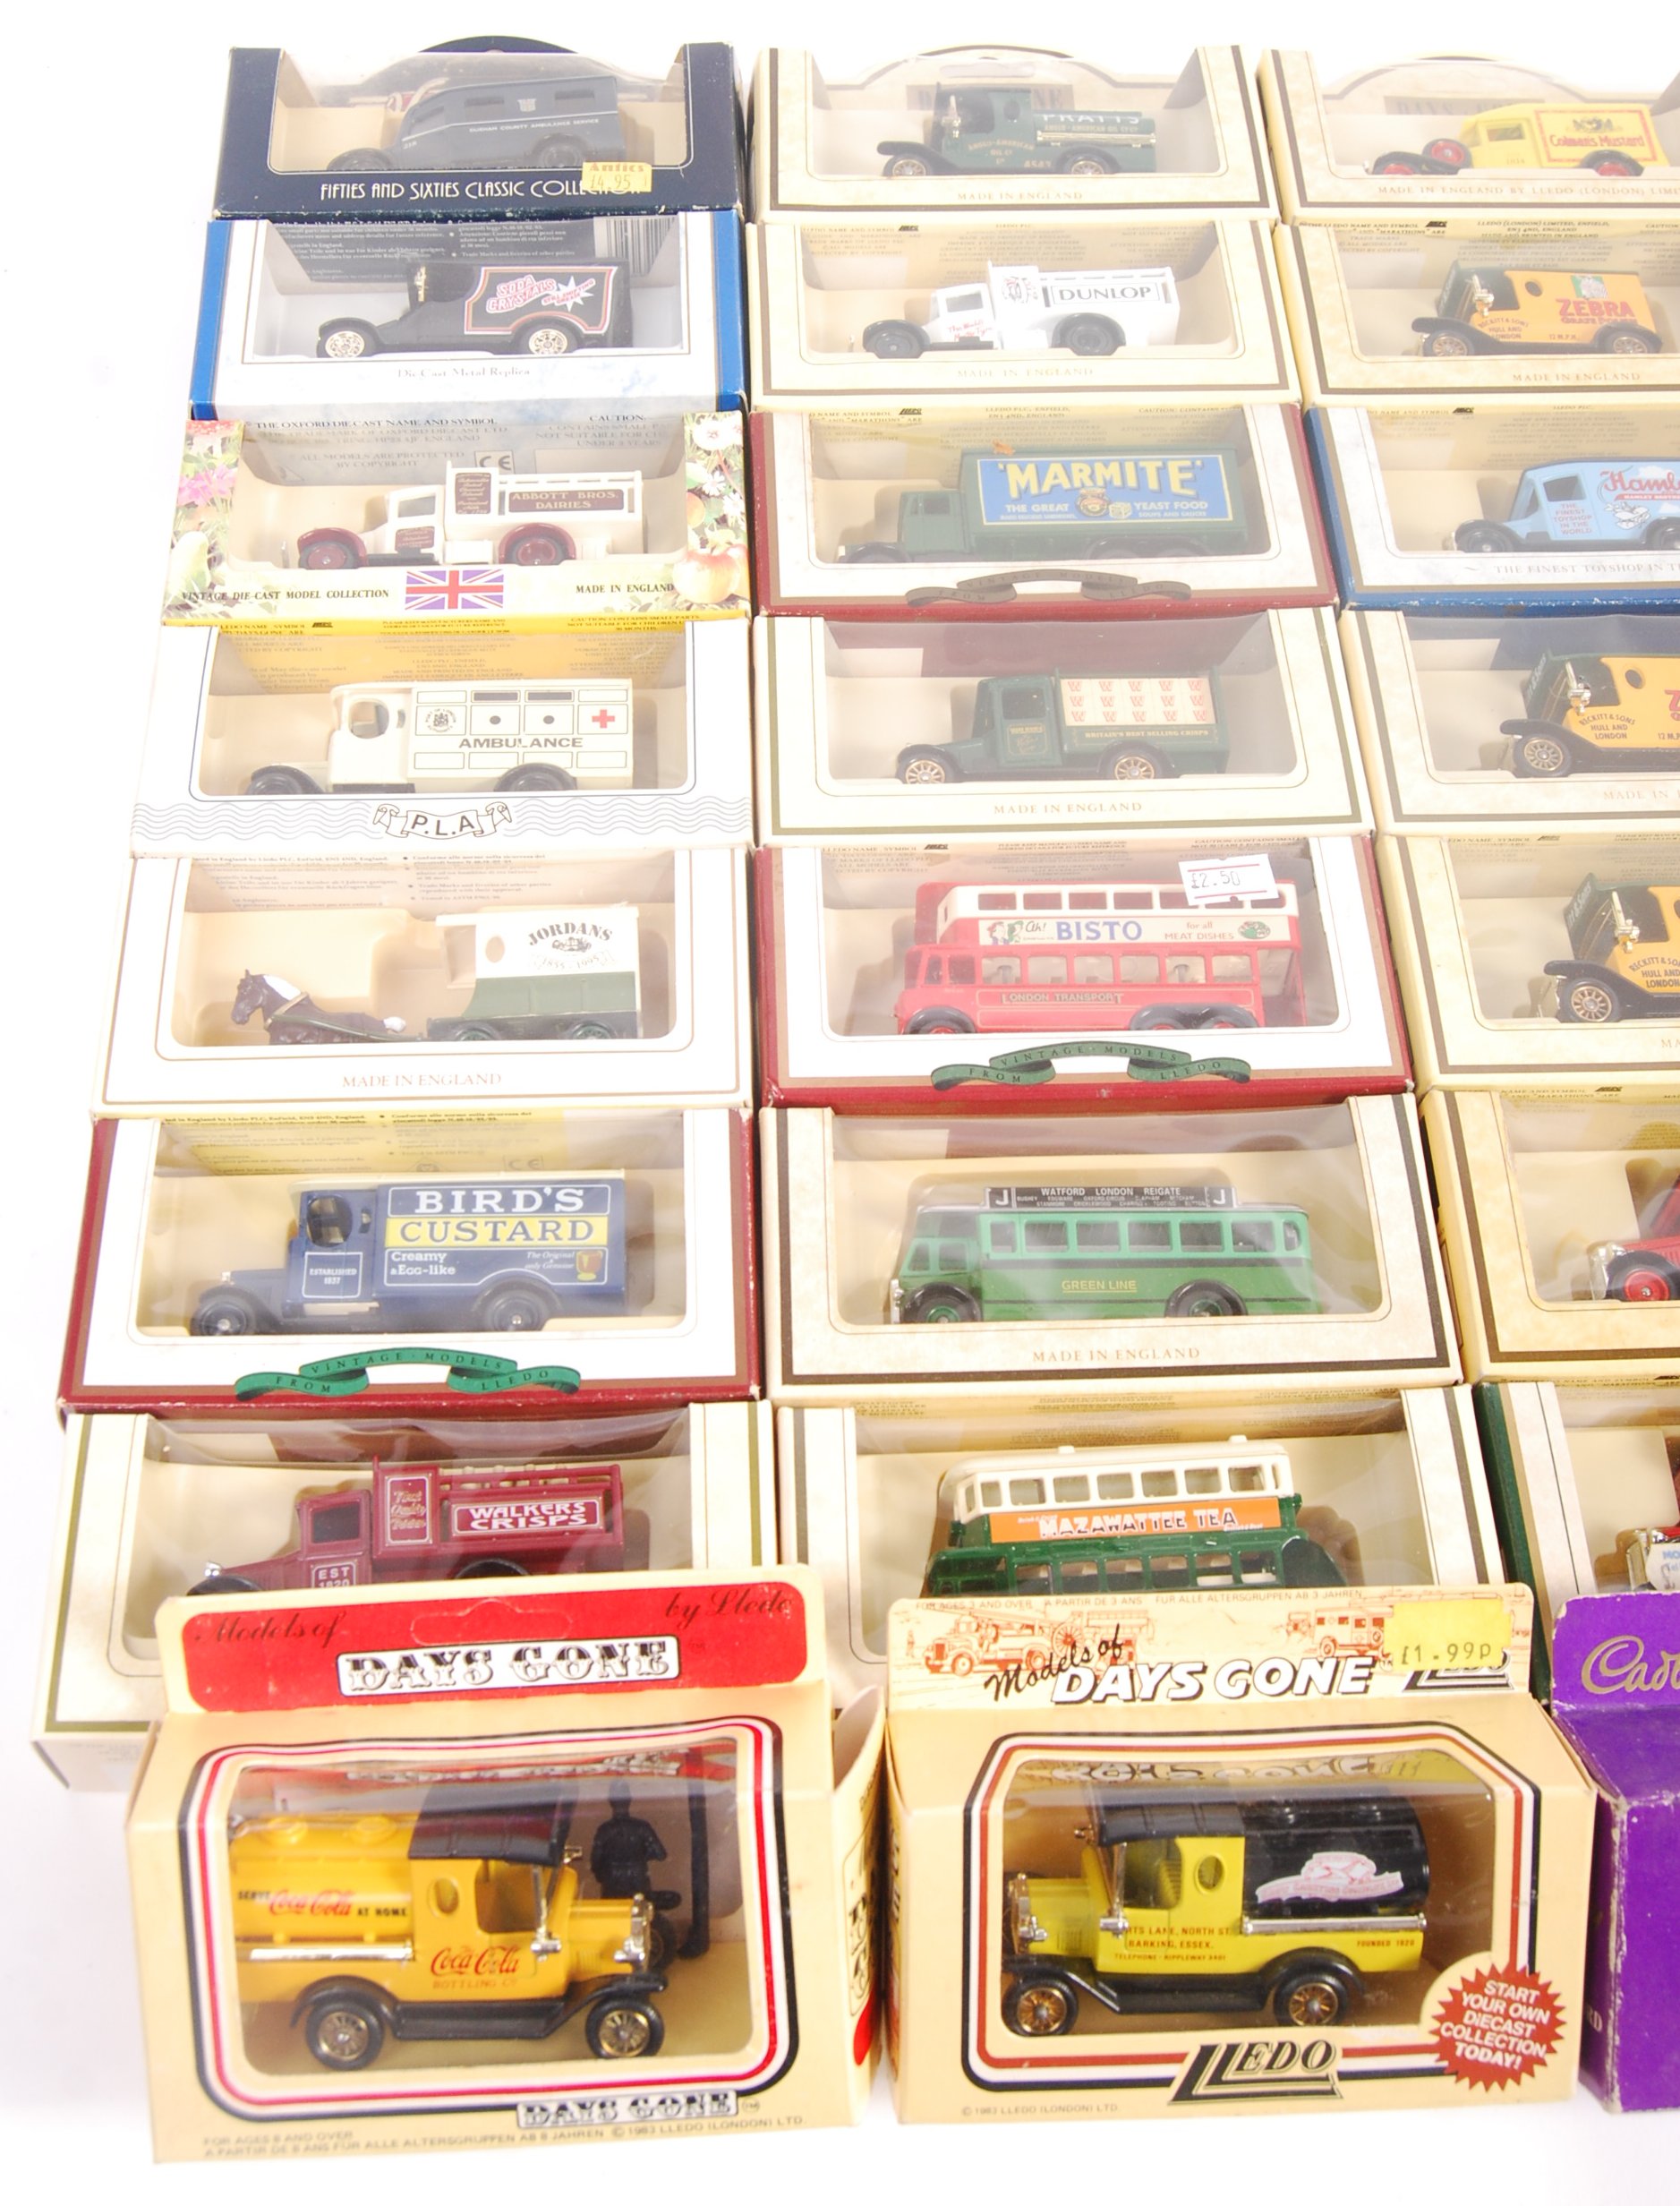 COLLECTION OF LLEDO DAYS GONE BOXED DIECAST MODELS - Image 3 of 3